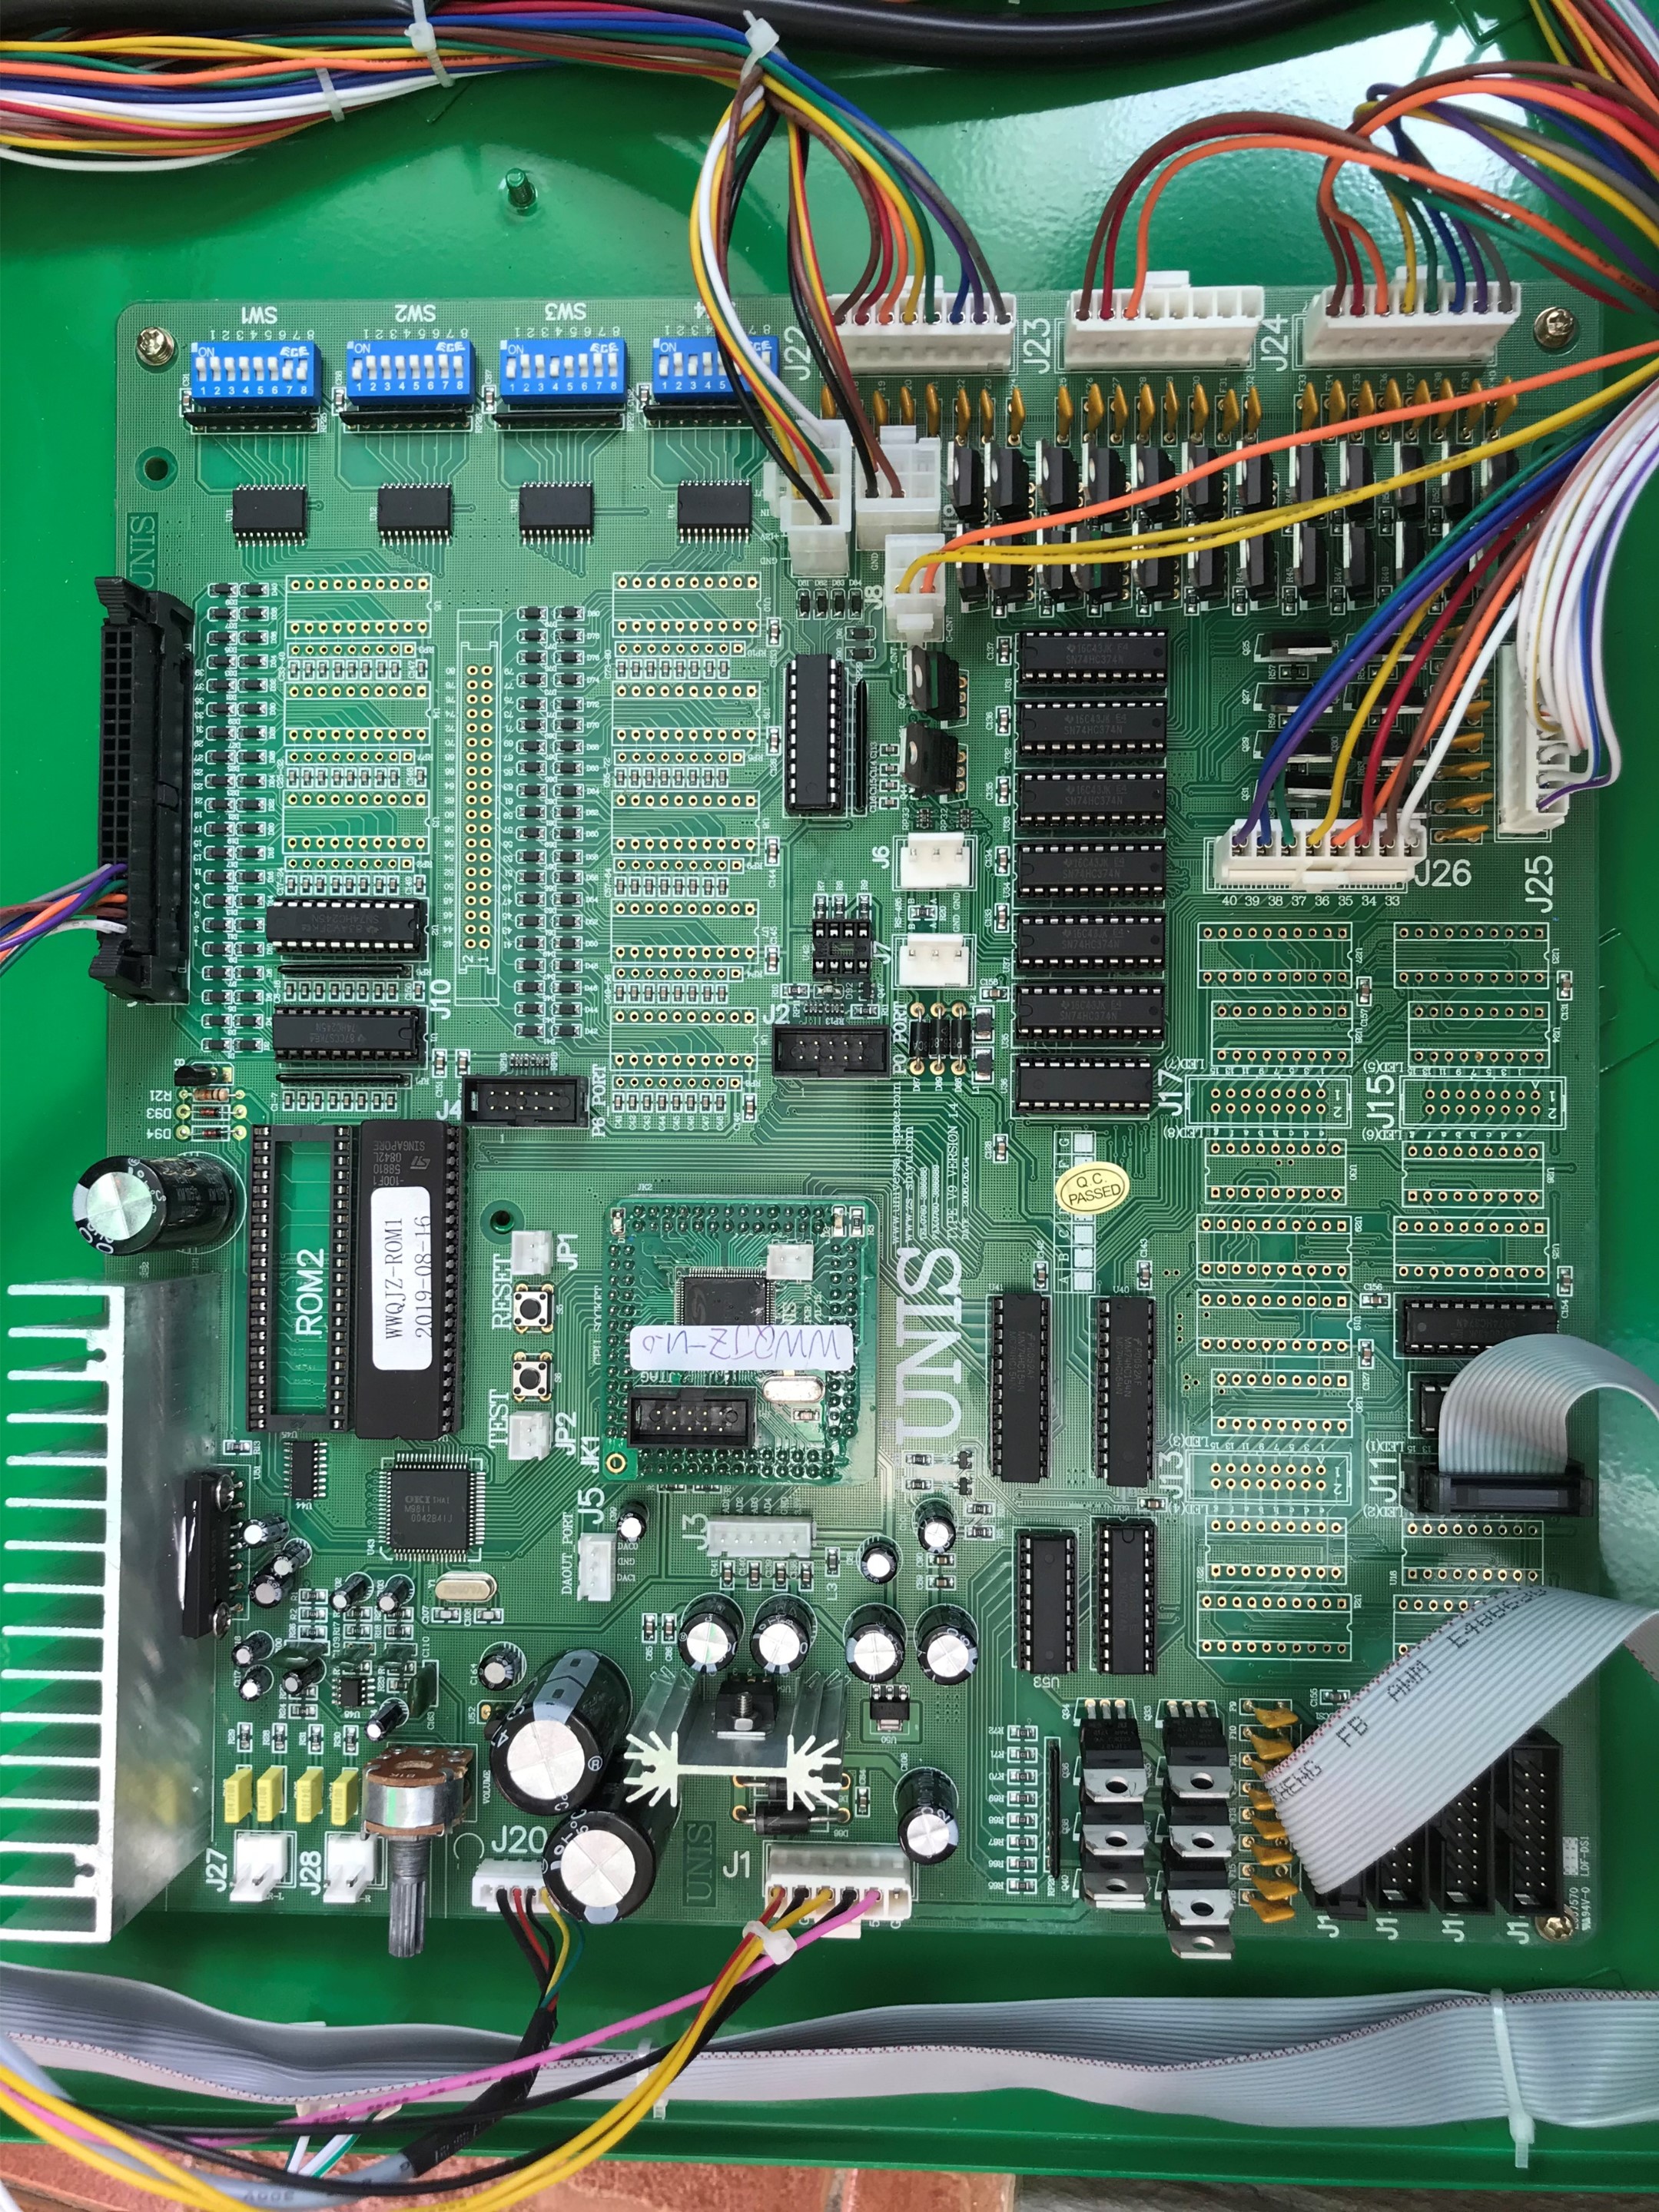 A typical arcade machine's motherboard